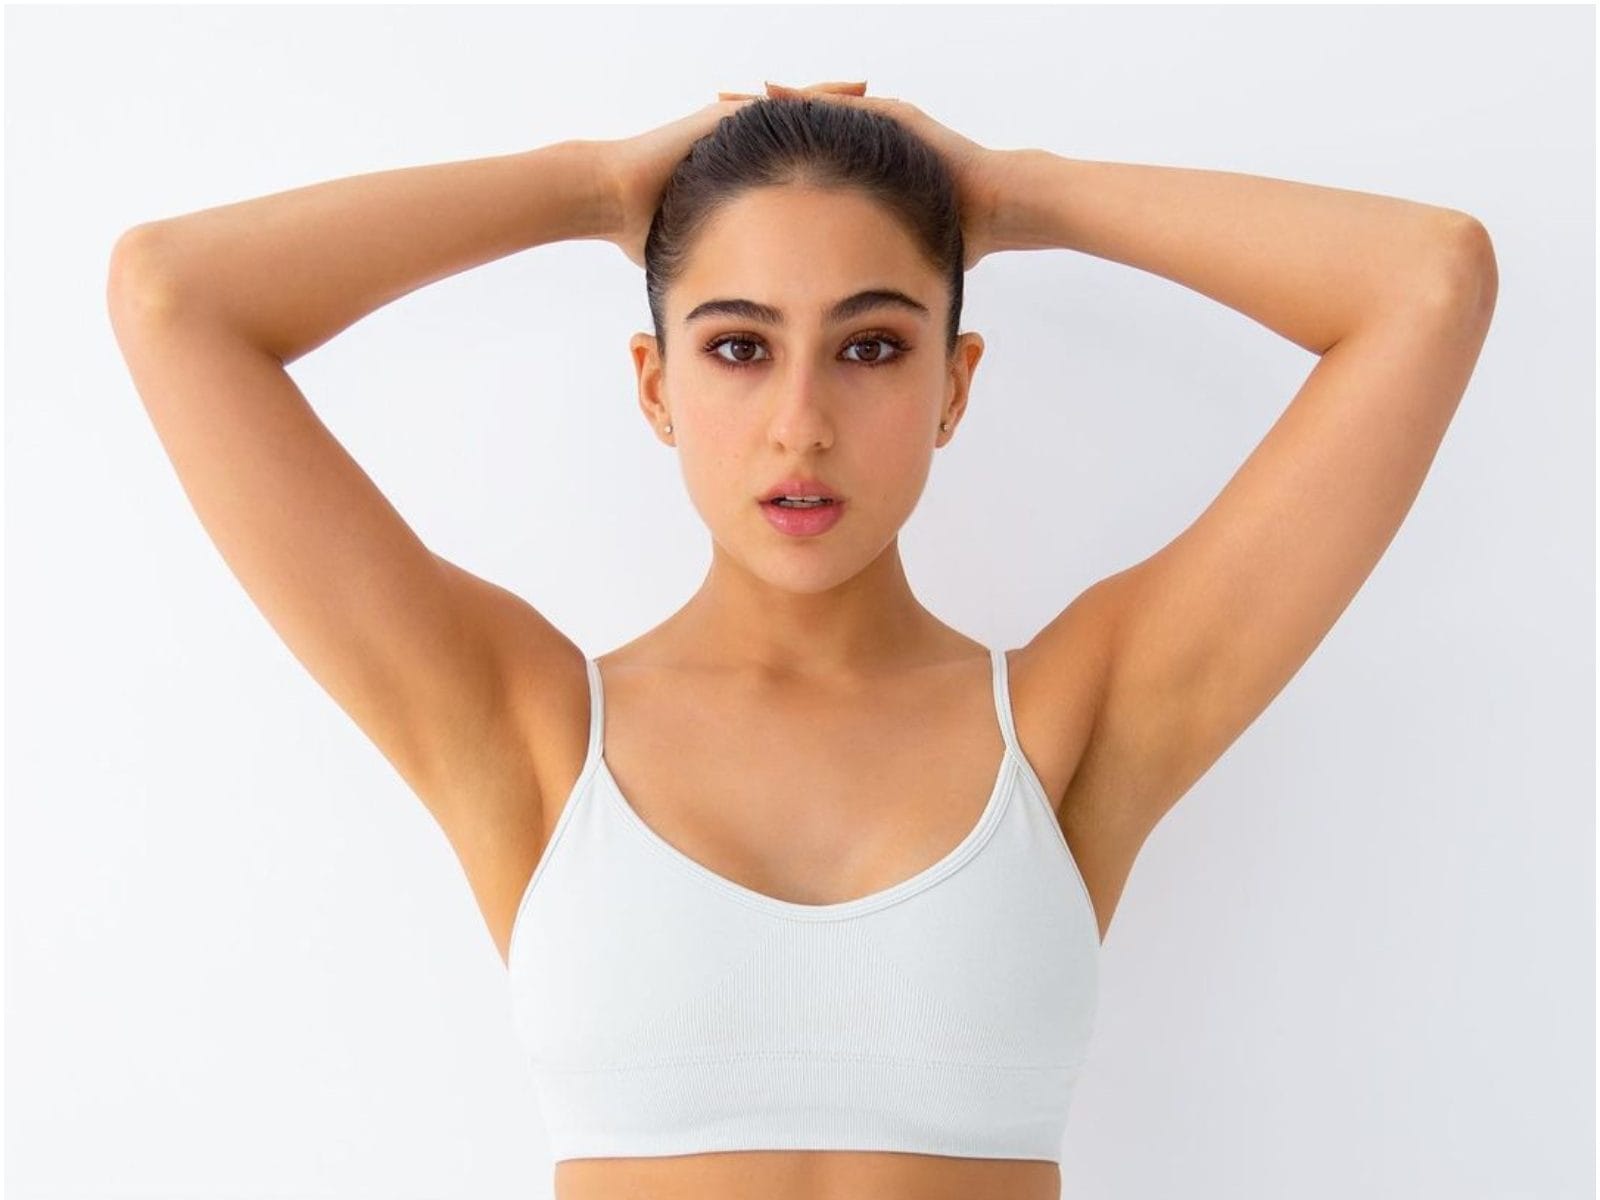 Sara Ali Khan Reveals Secret to Her Toned Legs and Abs as She Does